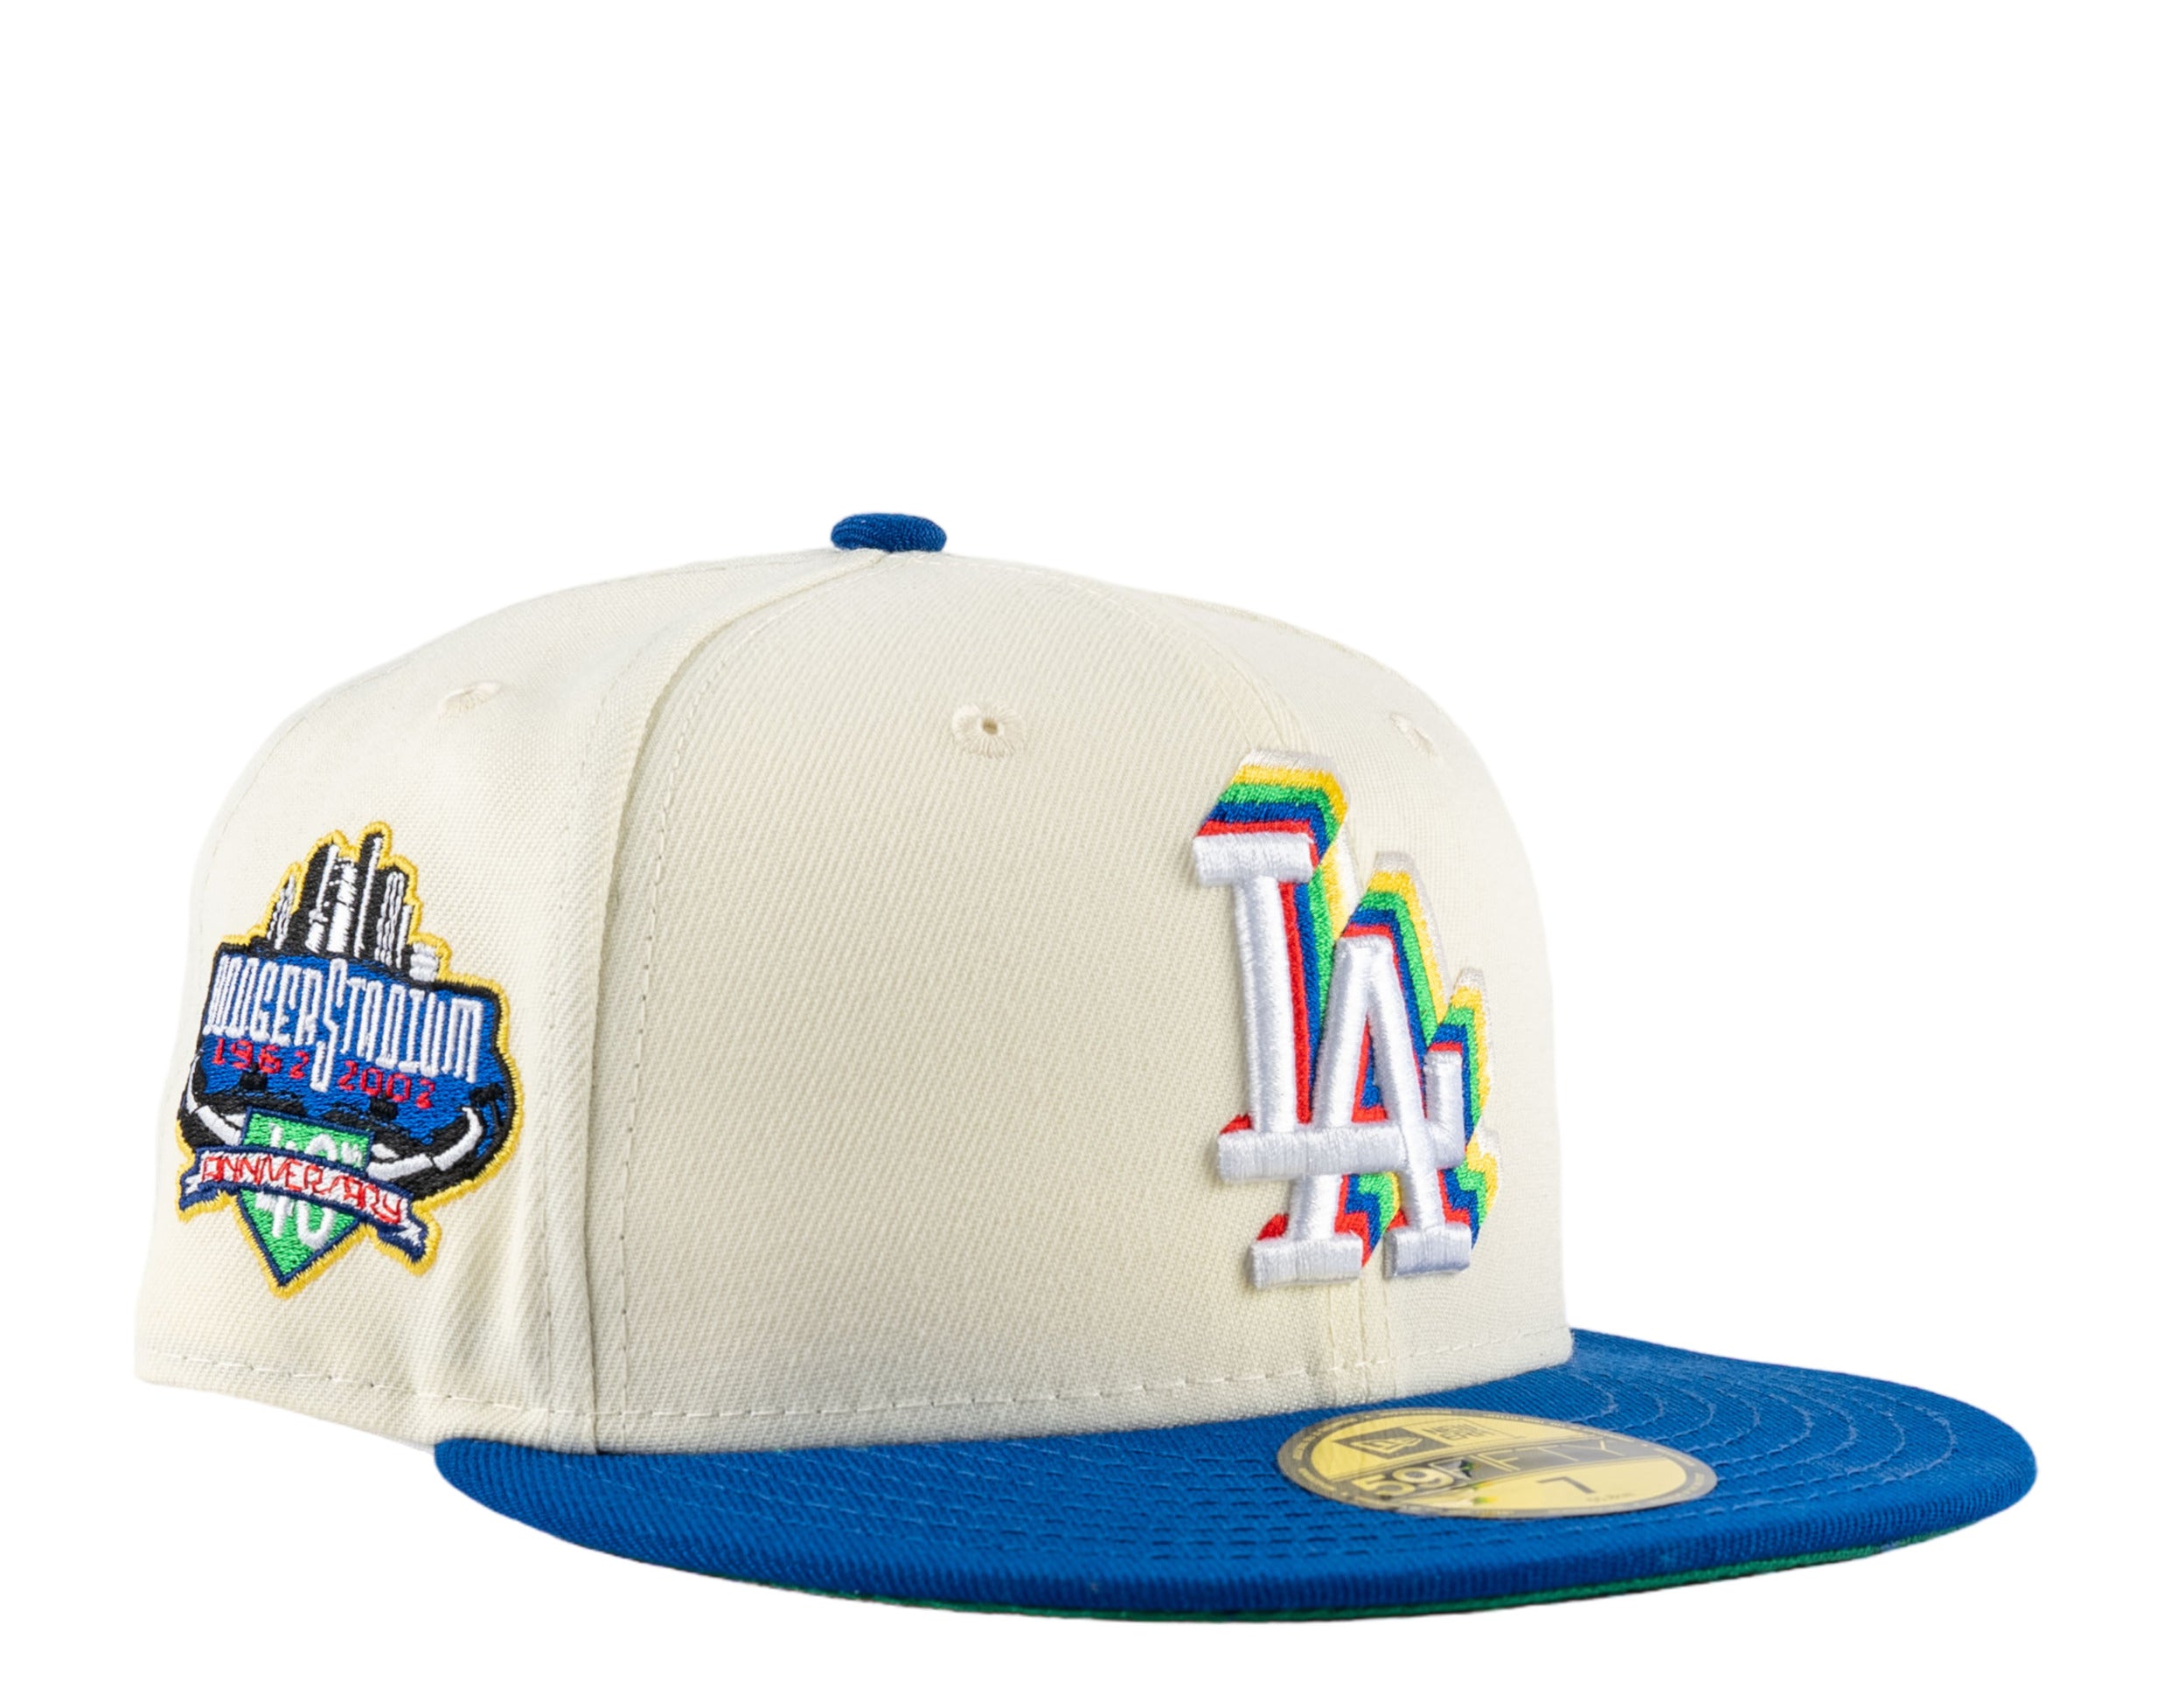 dodgers 40th anniversary patch